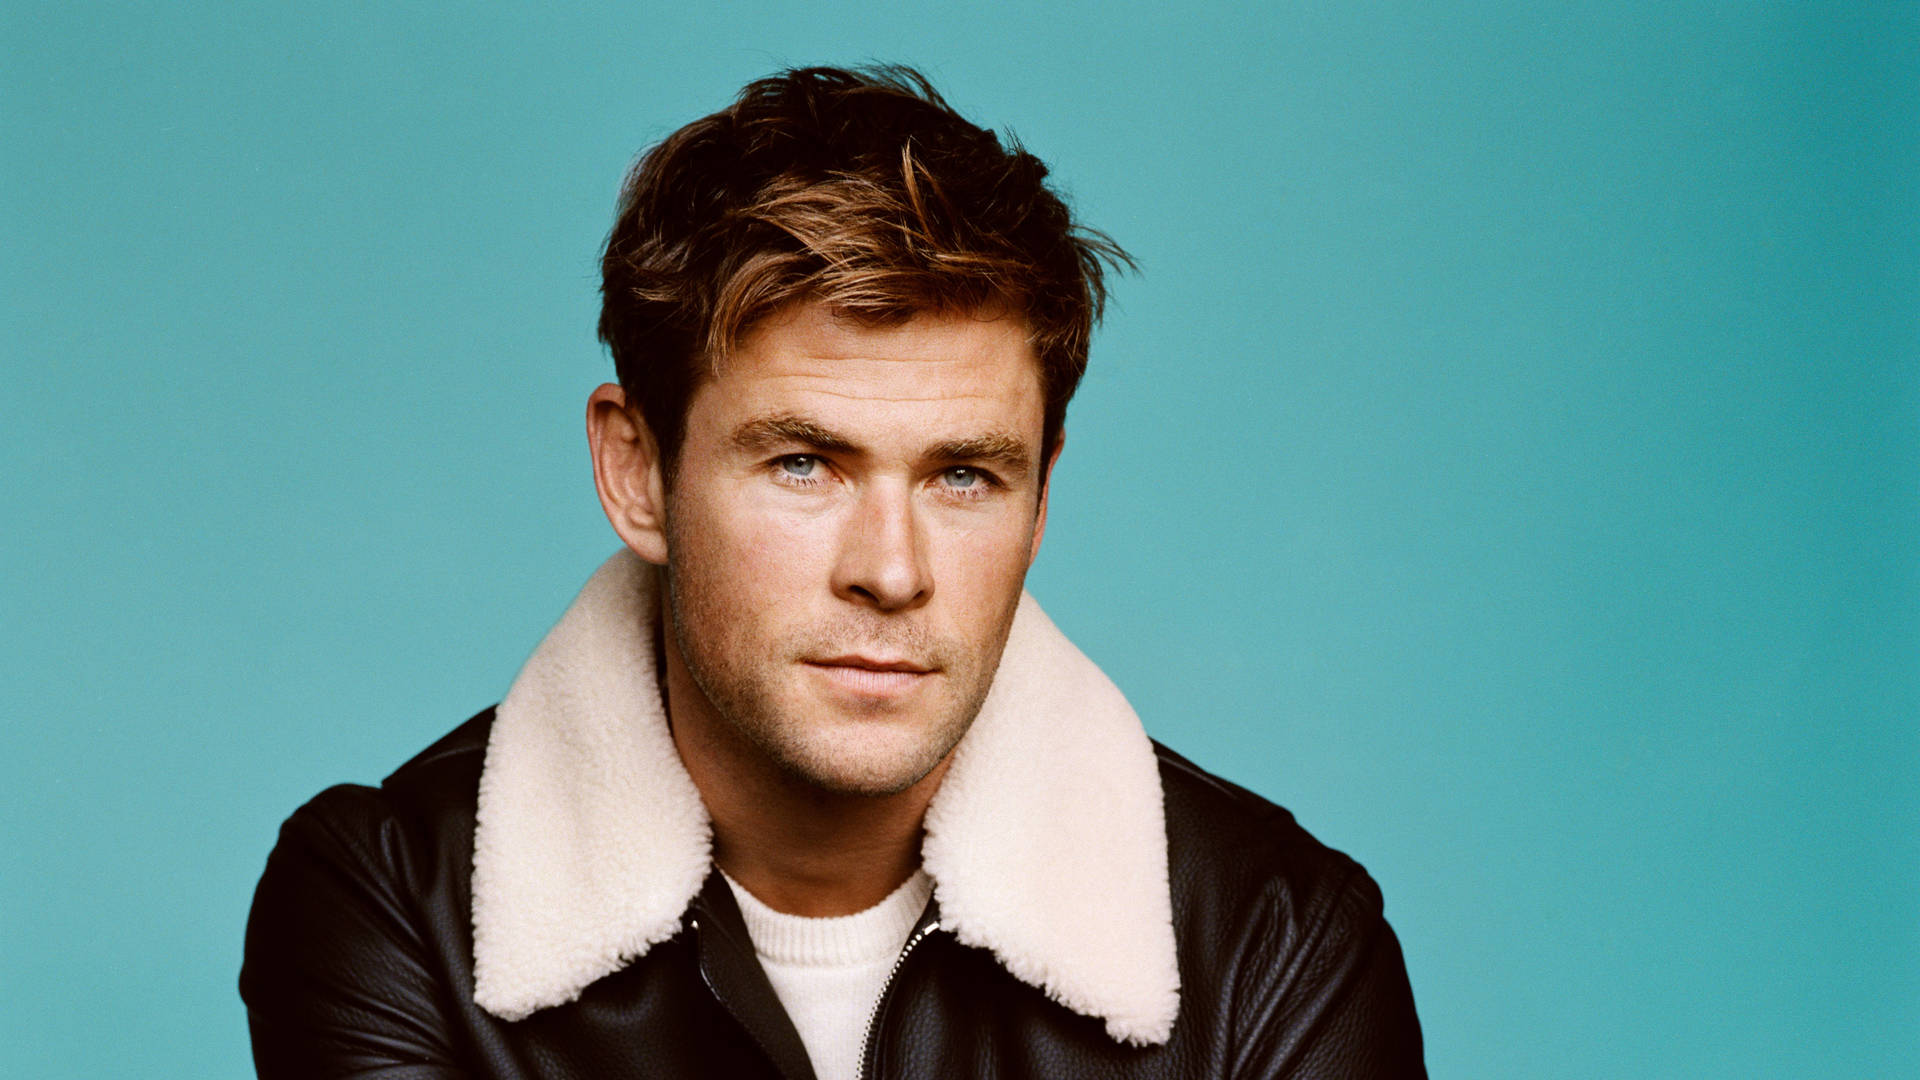 Chris Hemsworth Looks Dapper In A Fur And Leather Jacket. Background